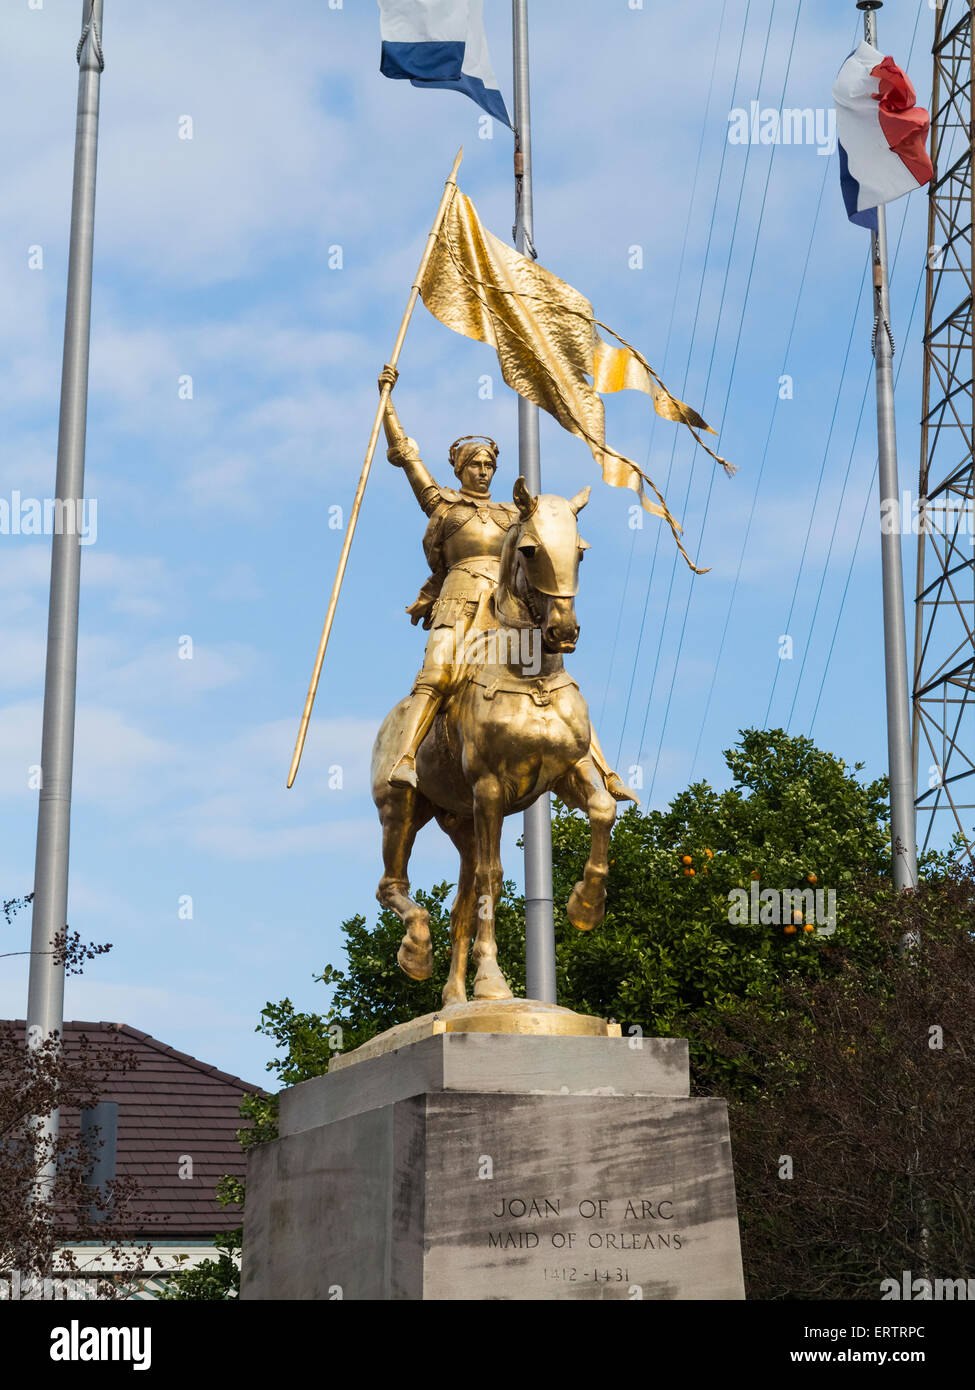 Statue of Joan of Arc, Maid of Orleans, in the French Market, New Orleans, Louisiana, USA Stock Photo